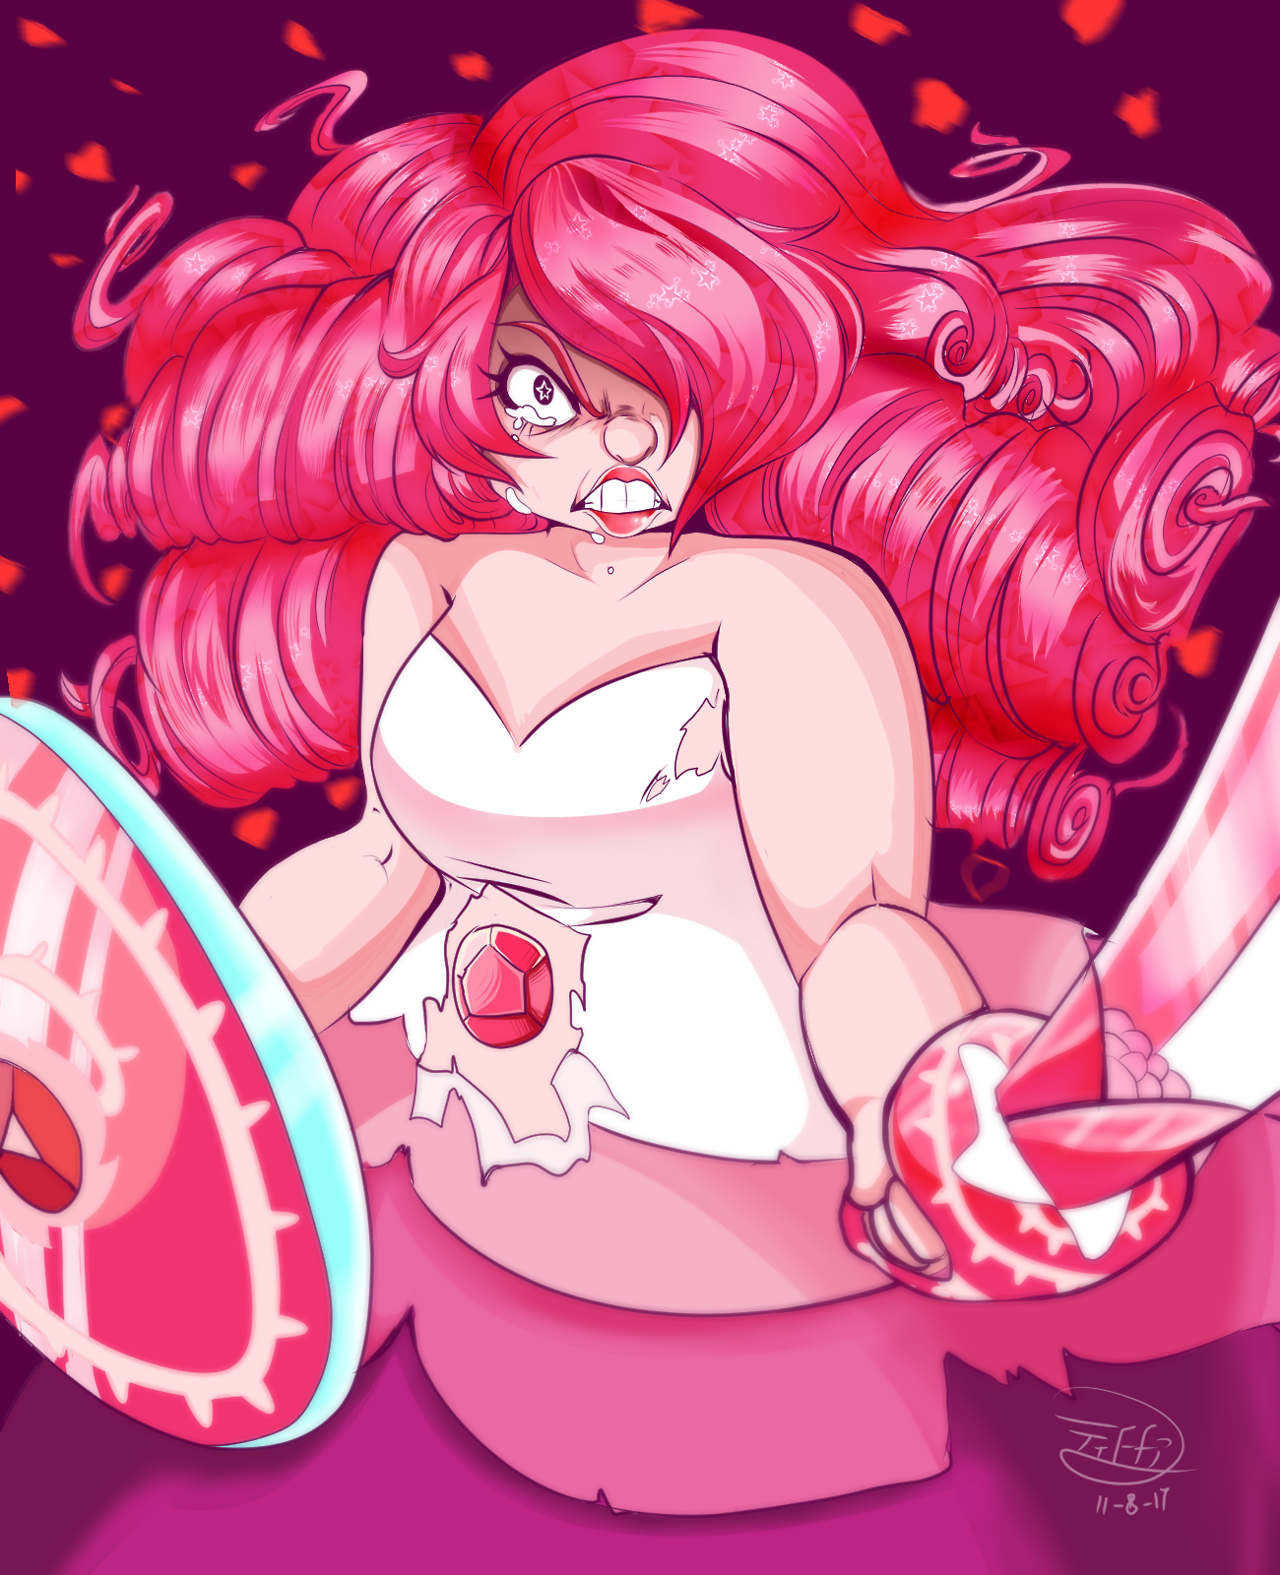 The perilous pink! Rose quartz is a really cool character~! I had been intending to draw some Steven universe fanart anyhow, so knowing that the new episodes will be coming out in just two days,...